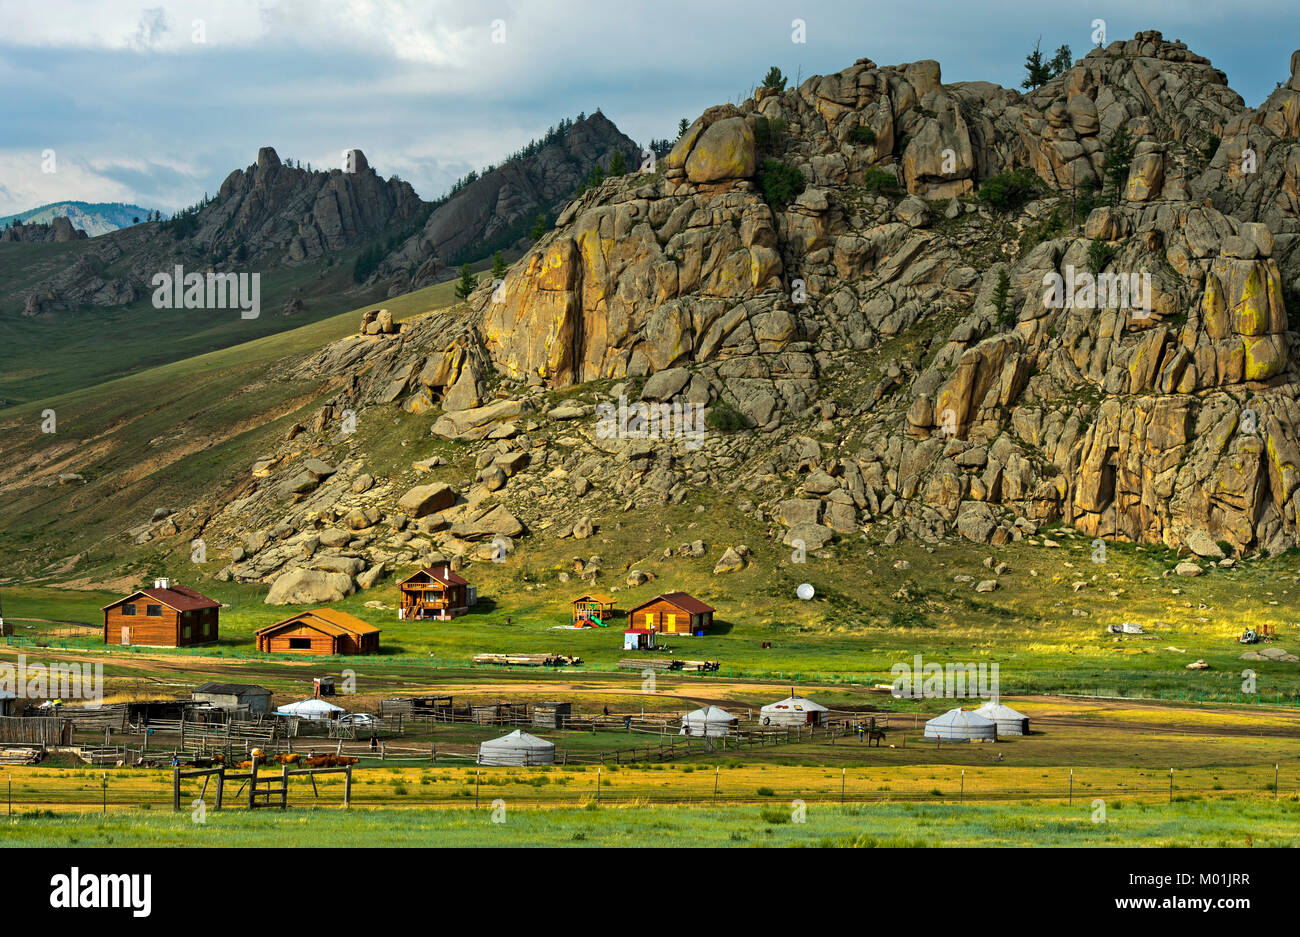 Hamlet with yurts and blockhouses in front of a rocky peak in the Mongolian steppe, Gorkhi-Terelj National Park, Mongolia Stock Photo